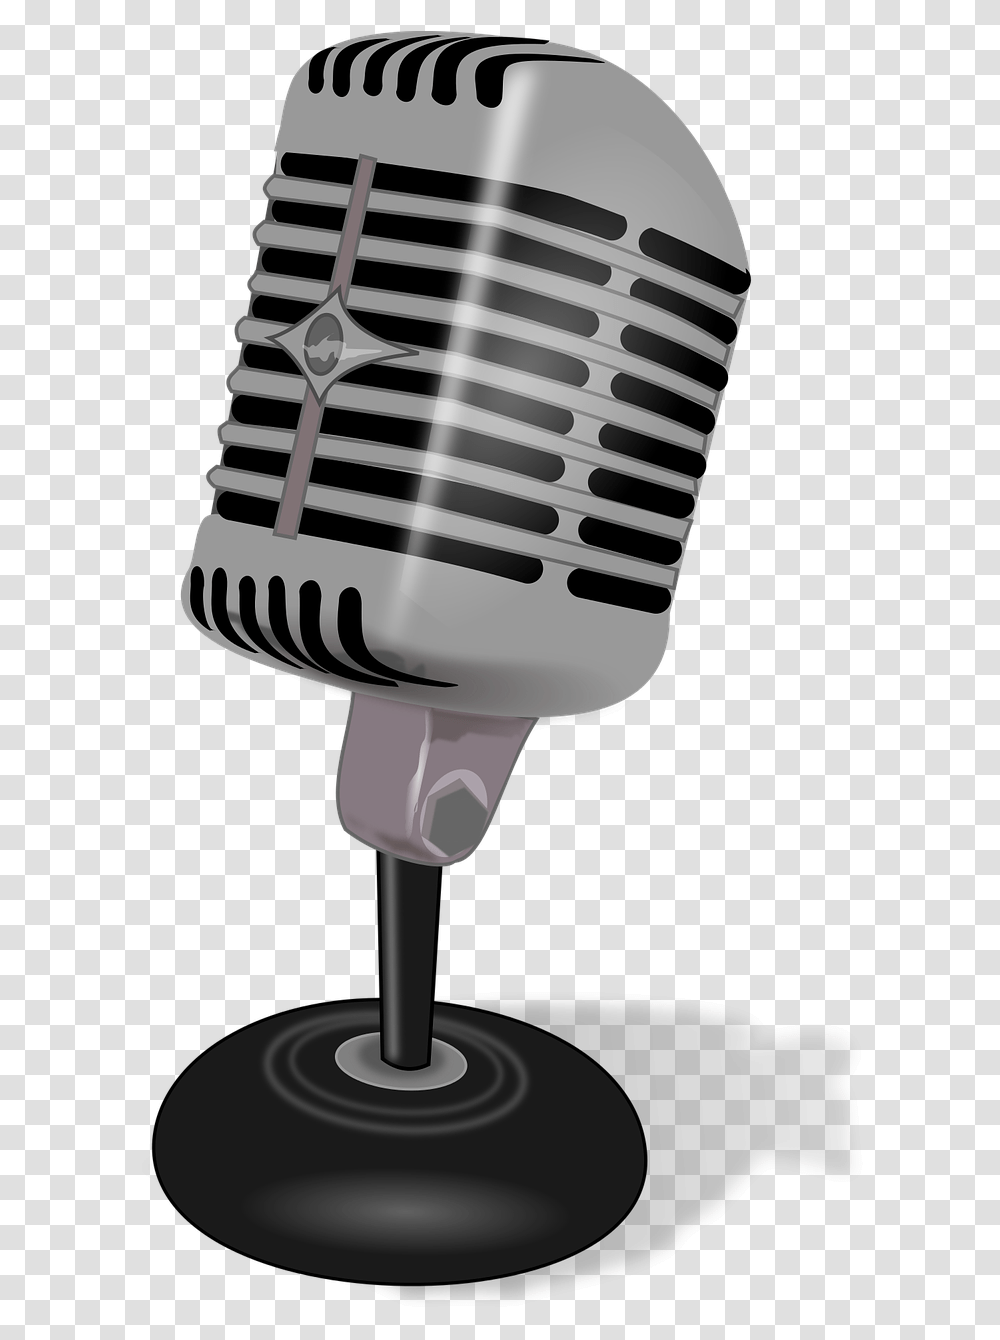 Microphone Free Use, Lamp, Electrical Device, Helmet Transparent Png